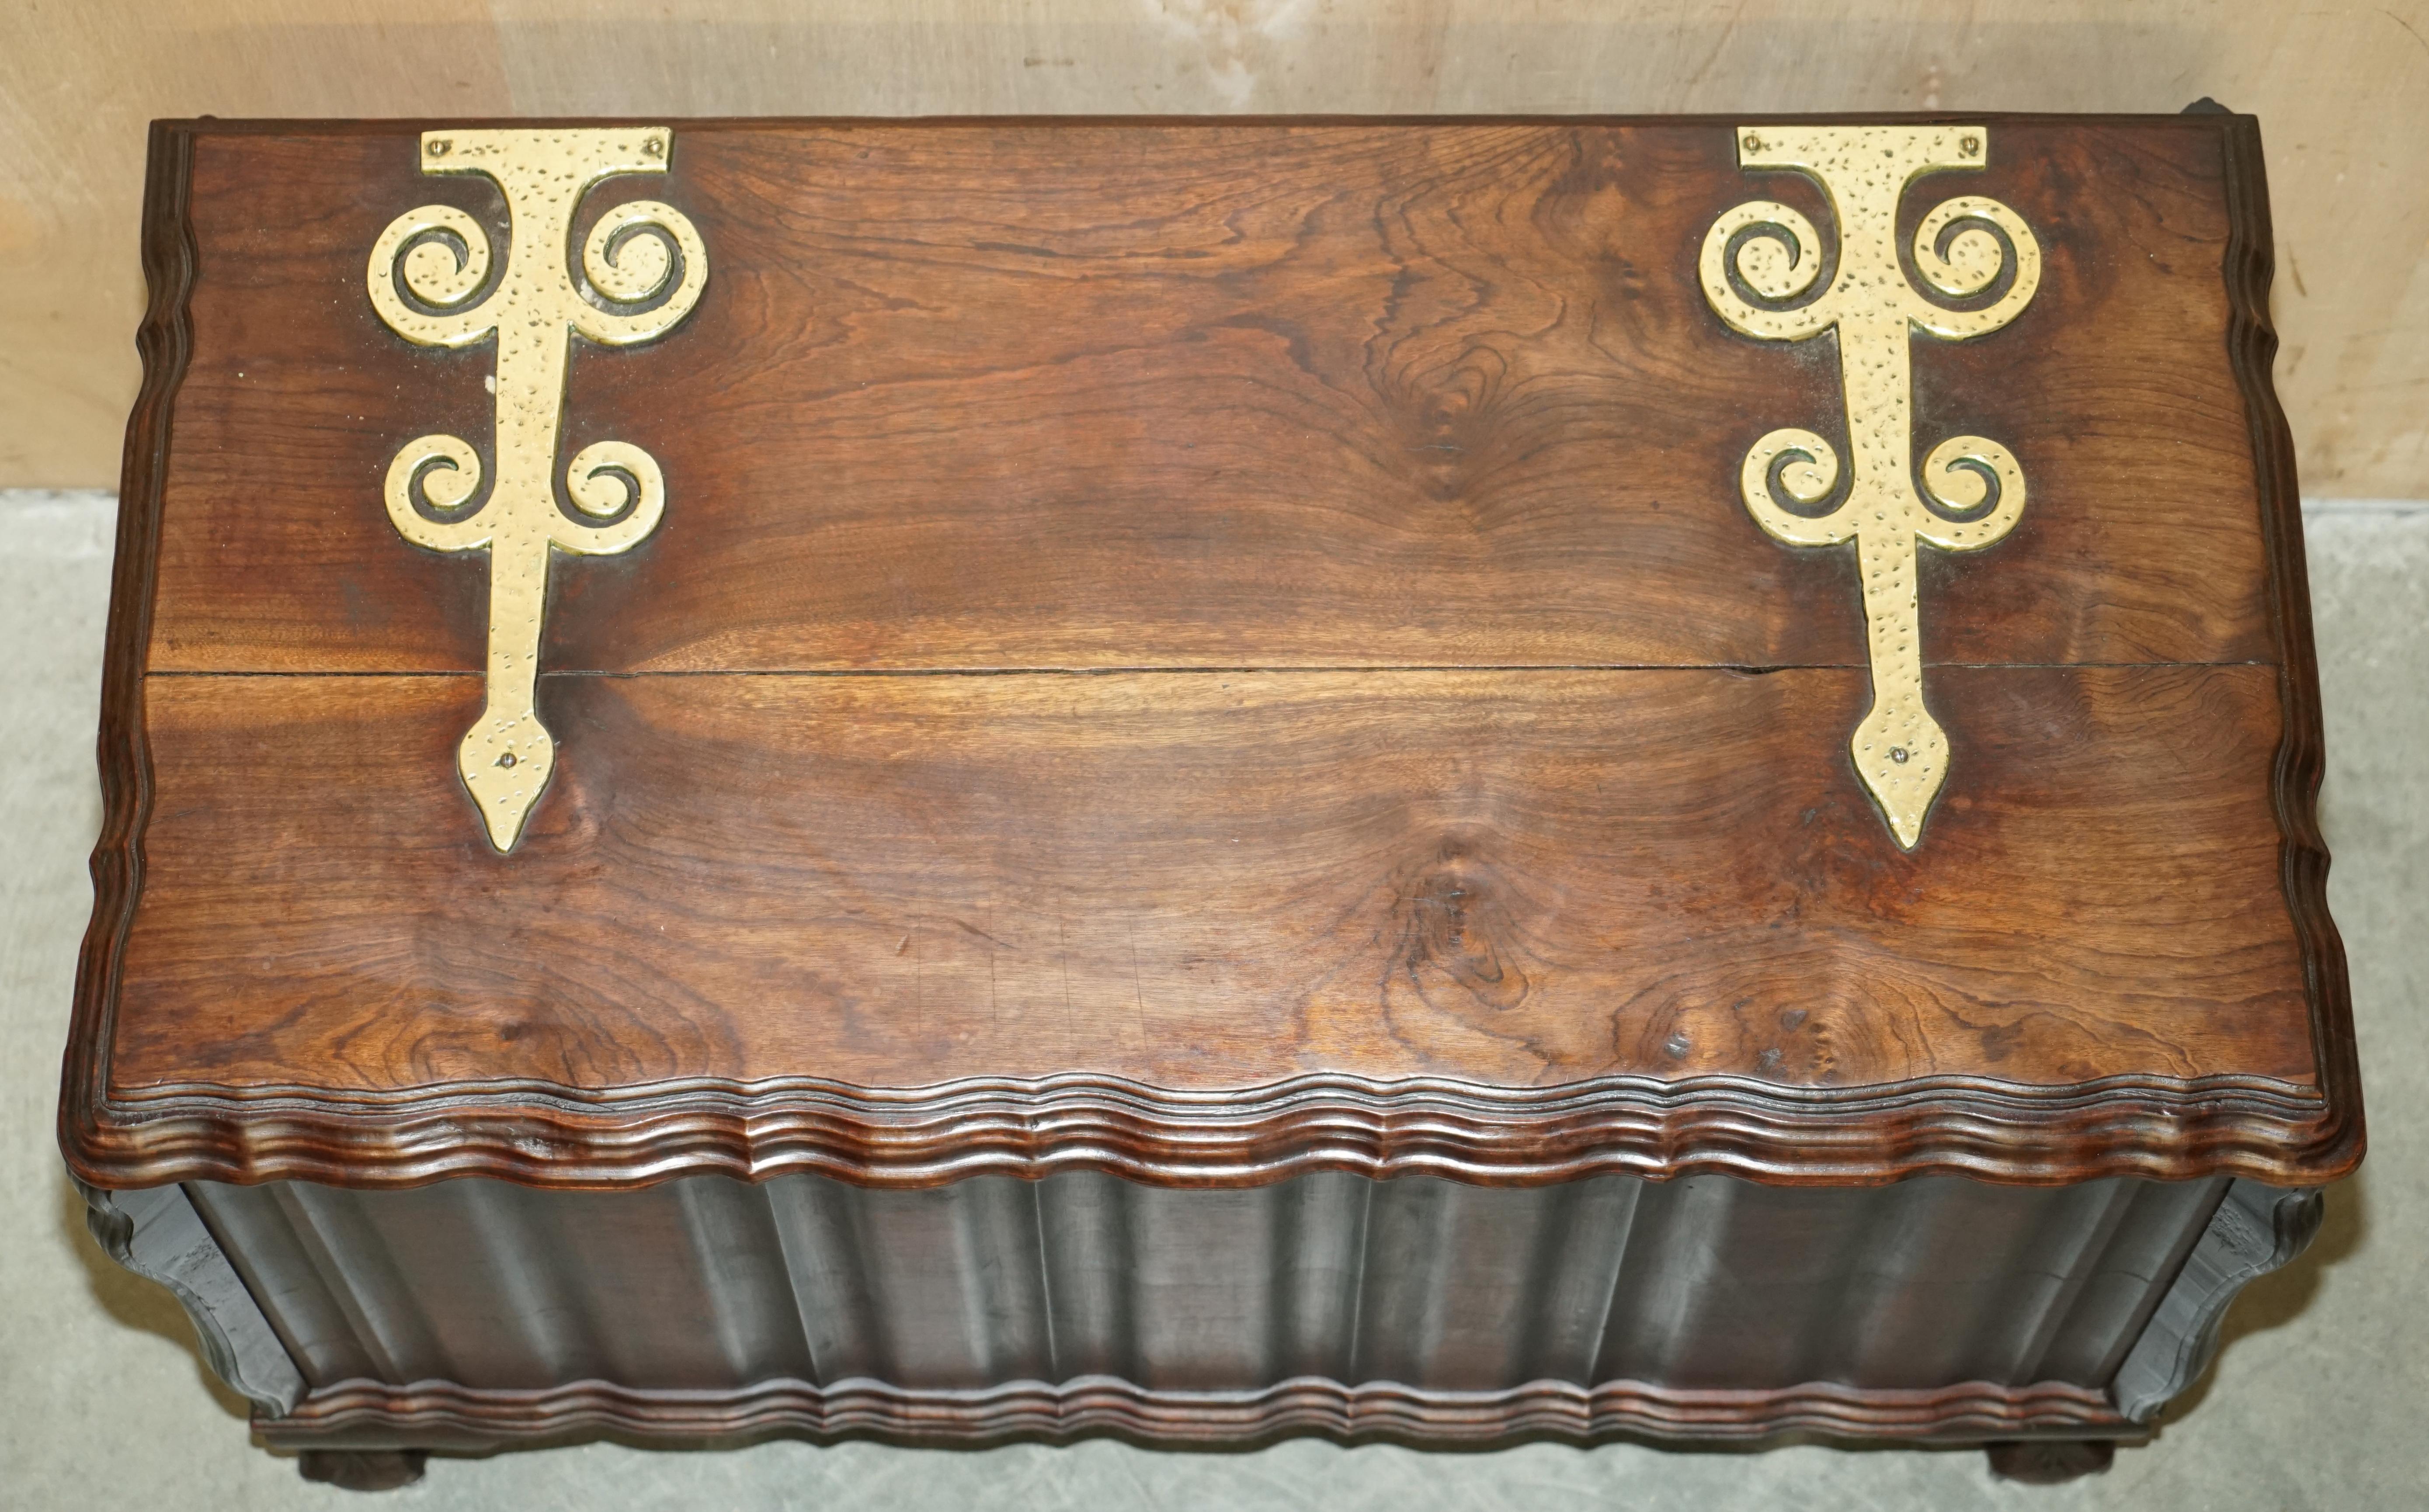 ViNTAGE HAND CARved HARDWOOD TRUNK OR CHEST WITH ORNATE OVERSIZED BRASS FITTINGS im Angebot 1